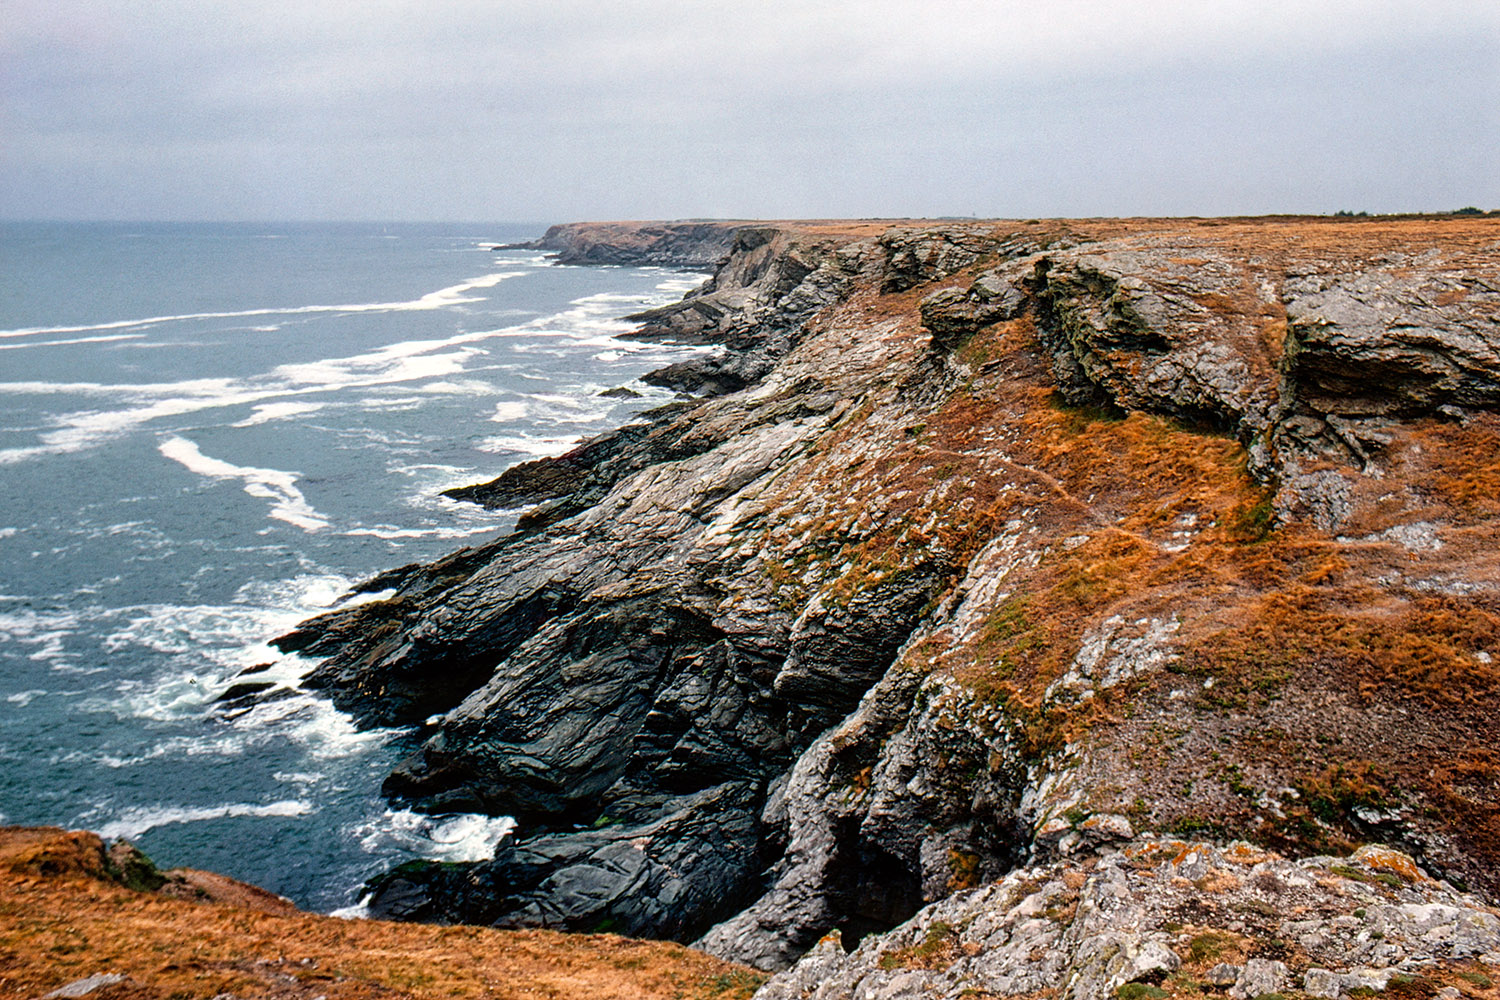 The craggy southern coast of Groix